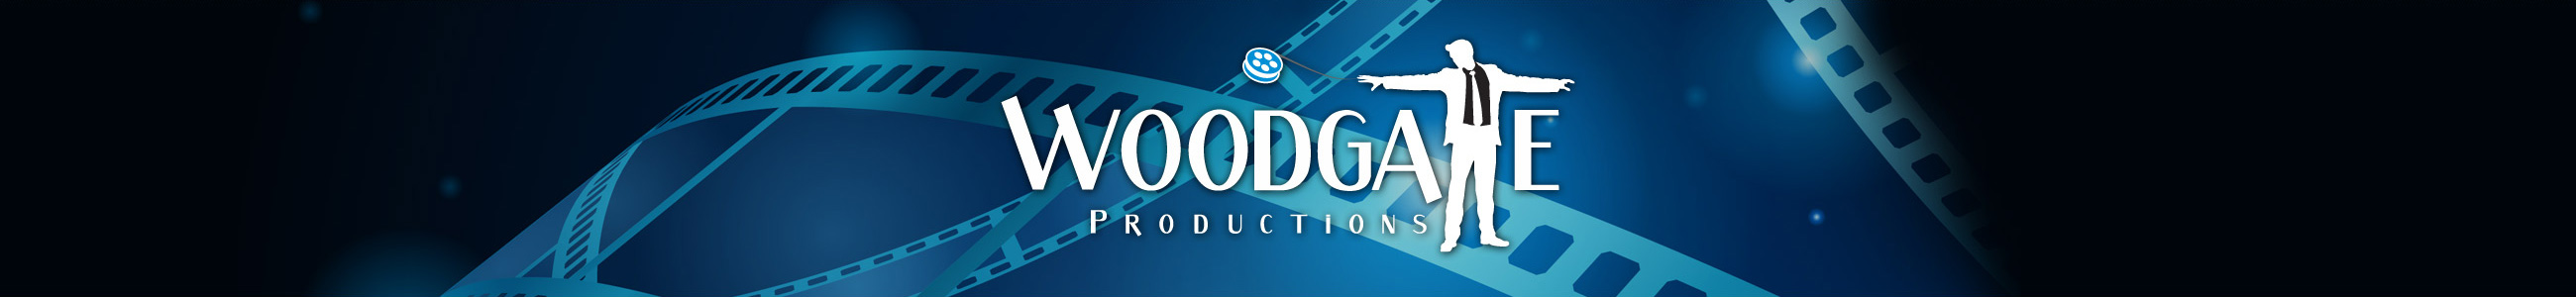 Woodgate Productions